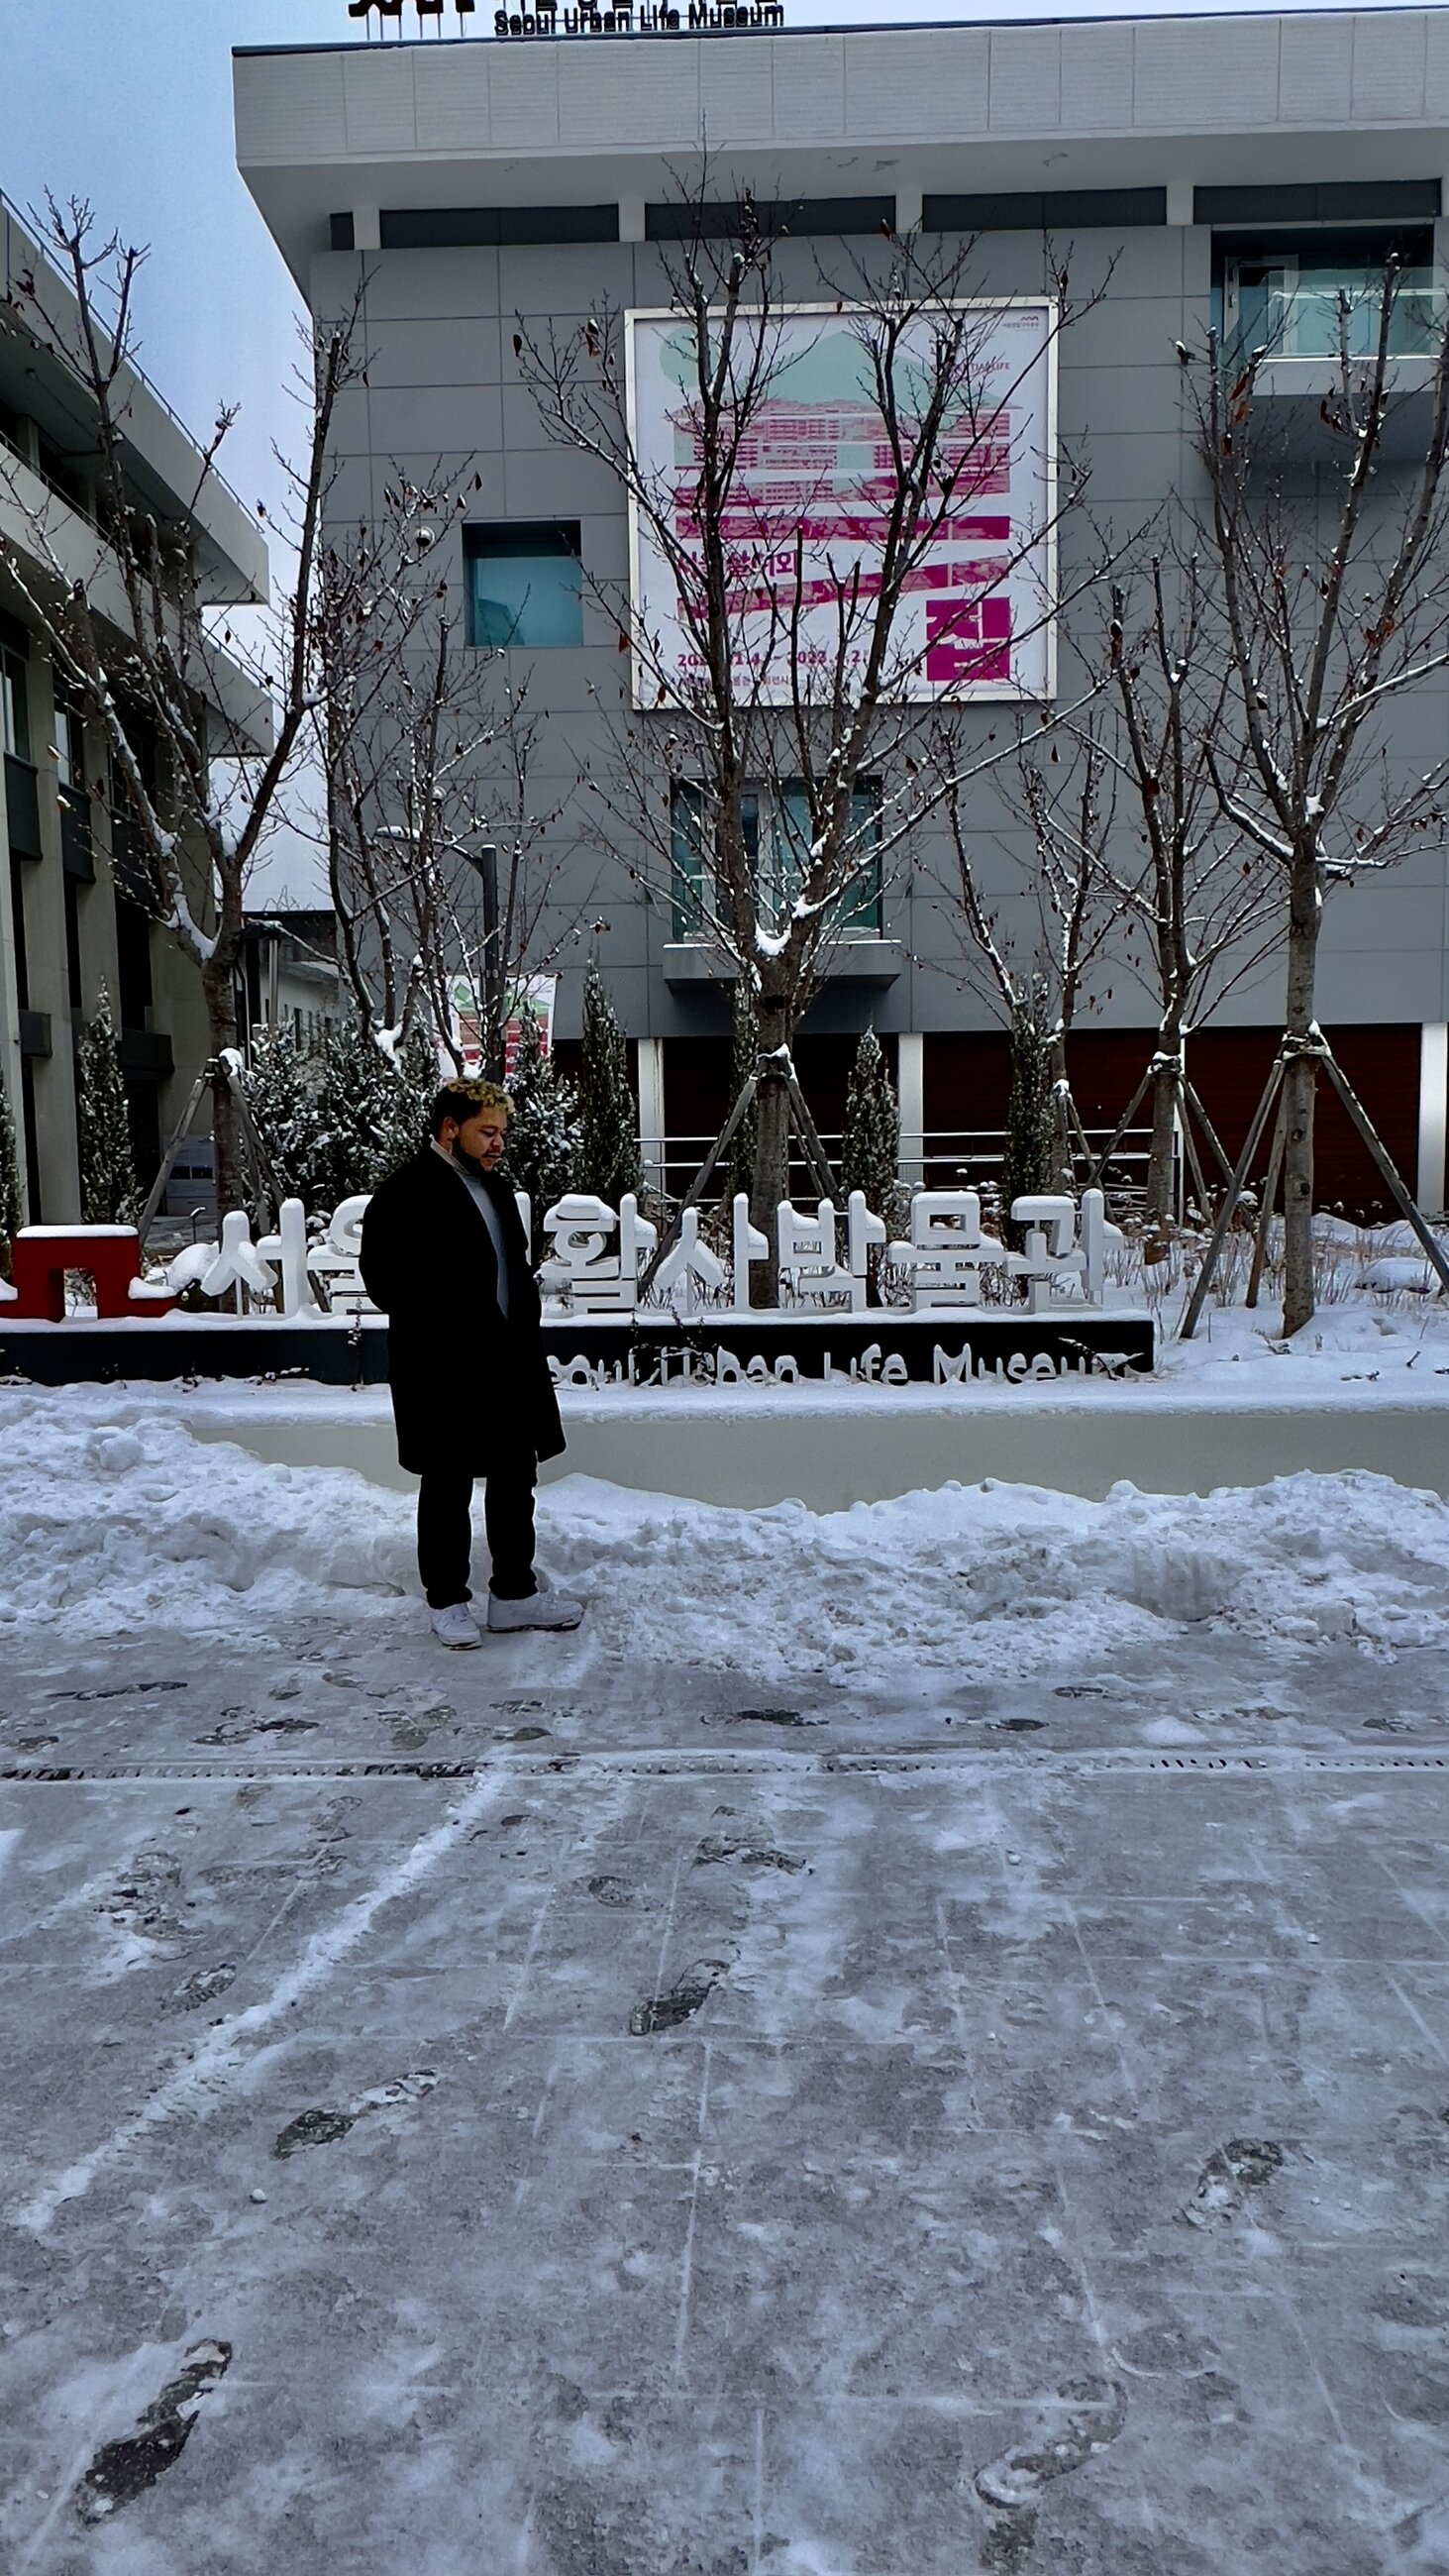  Captured on my farewell day in South Korea. My final class for the semester concluded with a visit to the Seoul Urban Life Museum. Swiftly after, I rushed back to my dorm, ready to head to the airport for my homeward-bound flight.